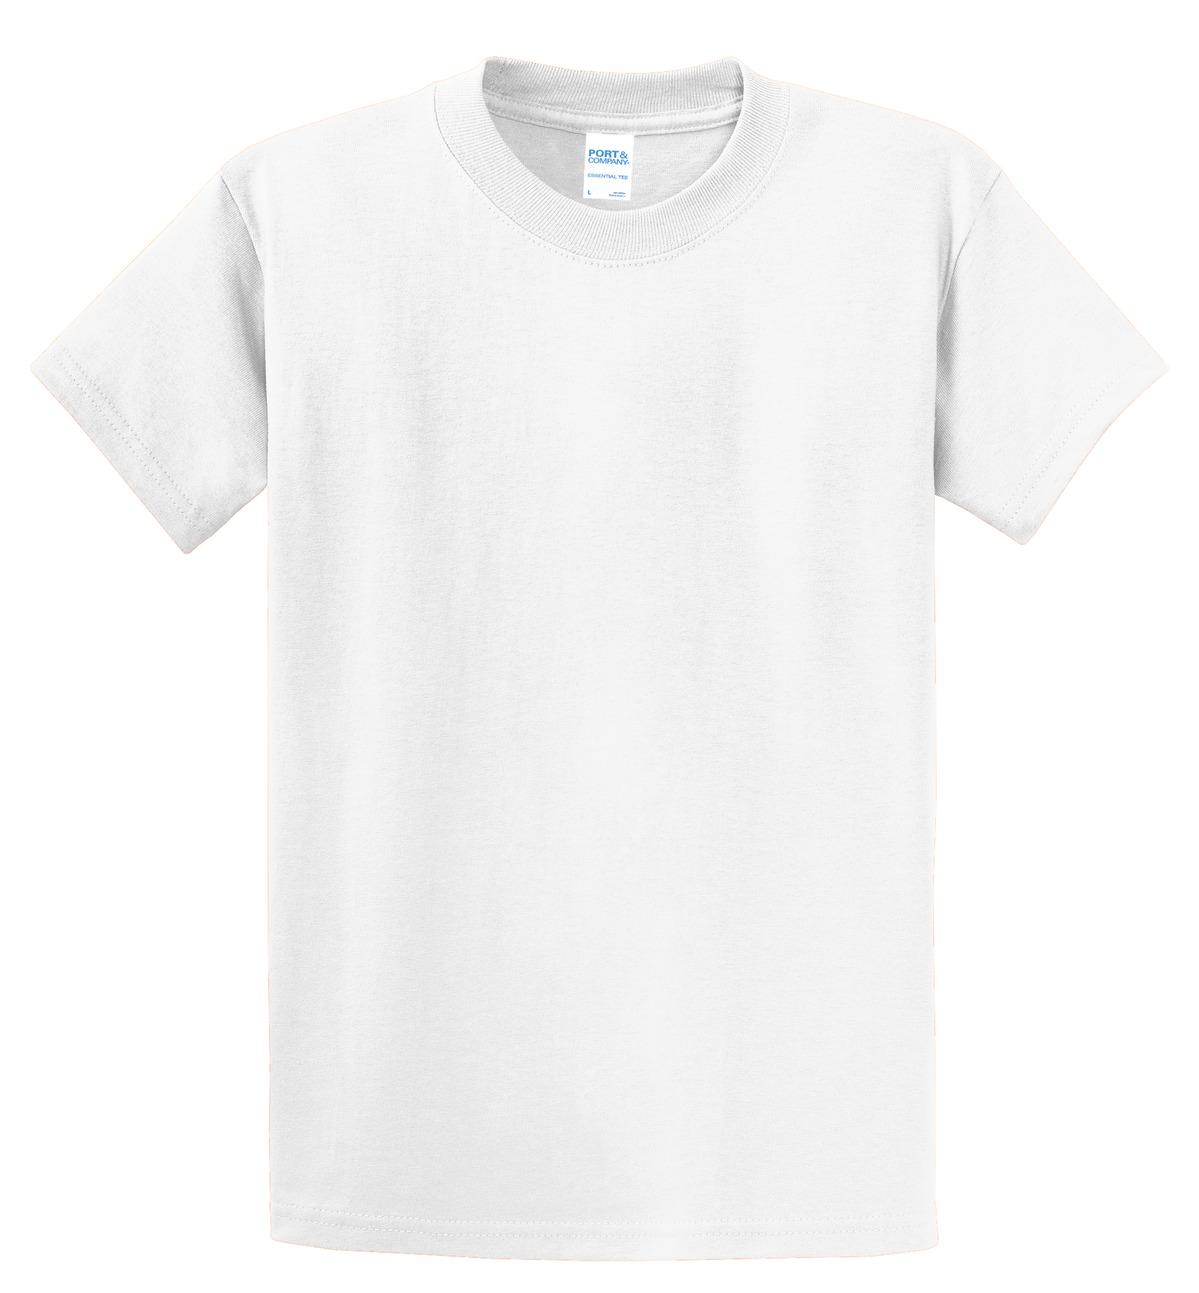 How do these shirts compare in softness to the District Perfect Weight tee?